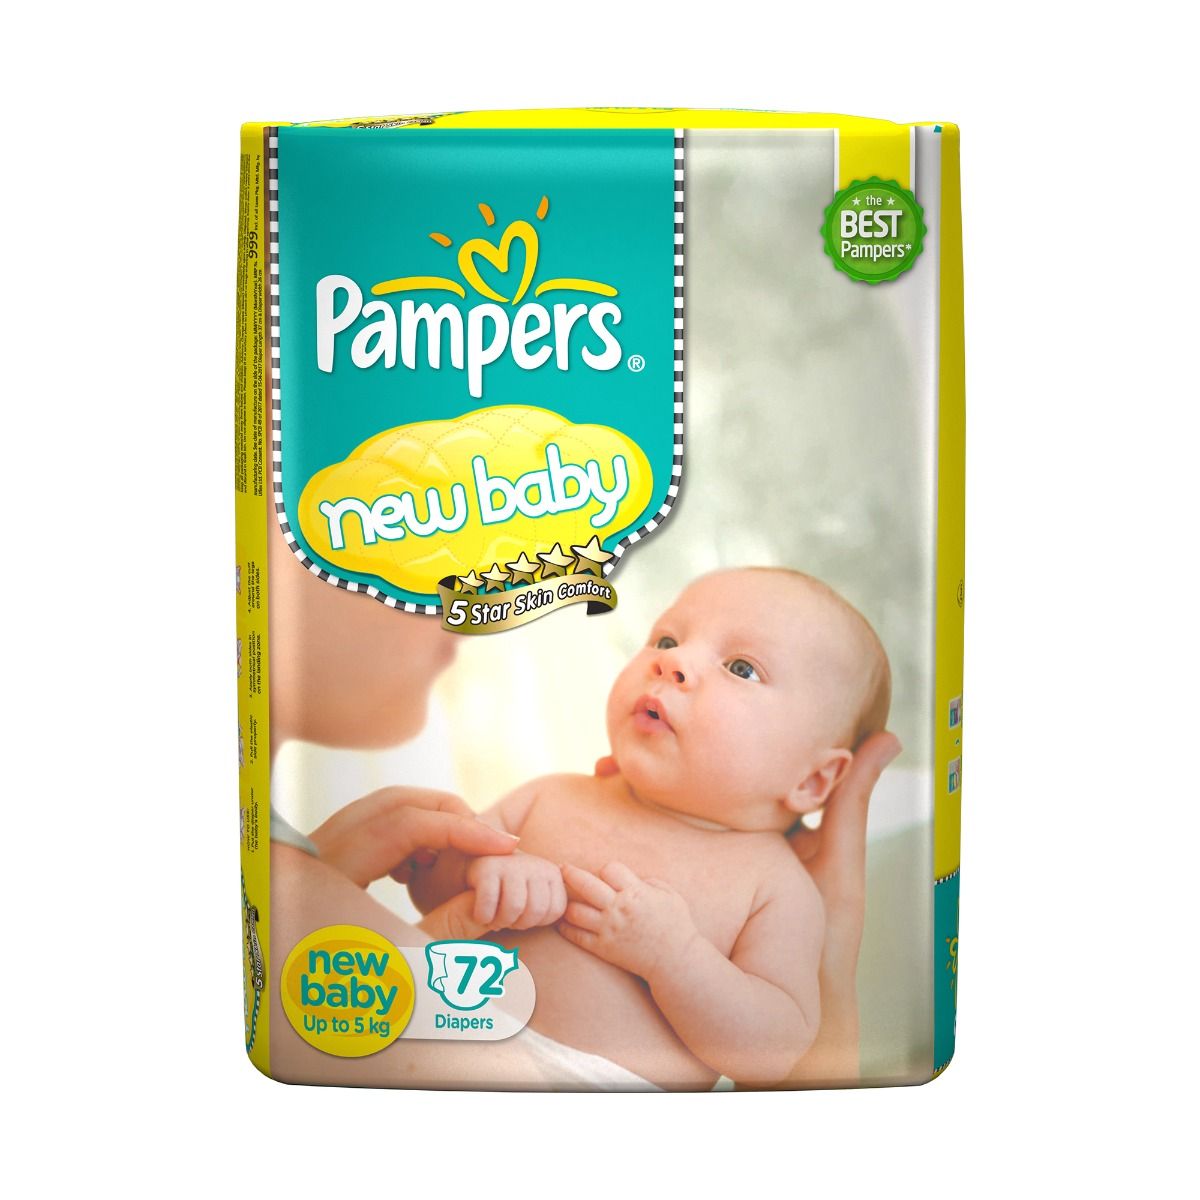 Pampers New Baby Diapers, 72 Count, Pack of 1 